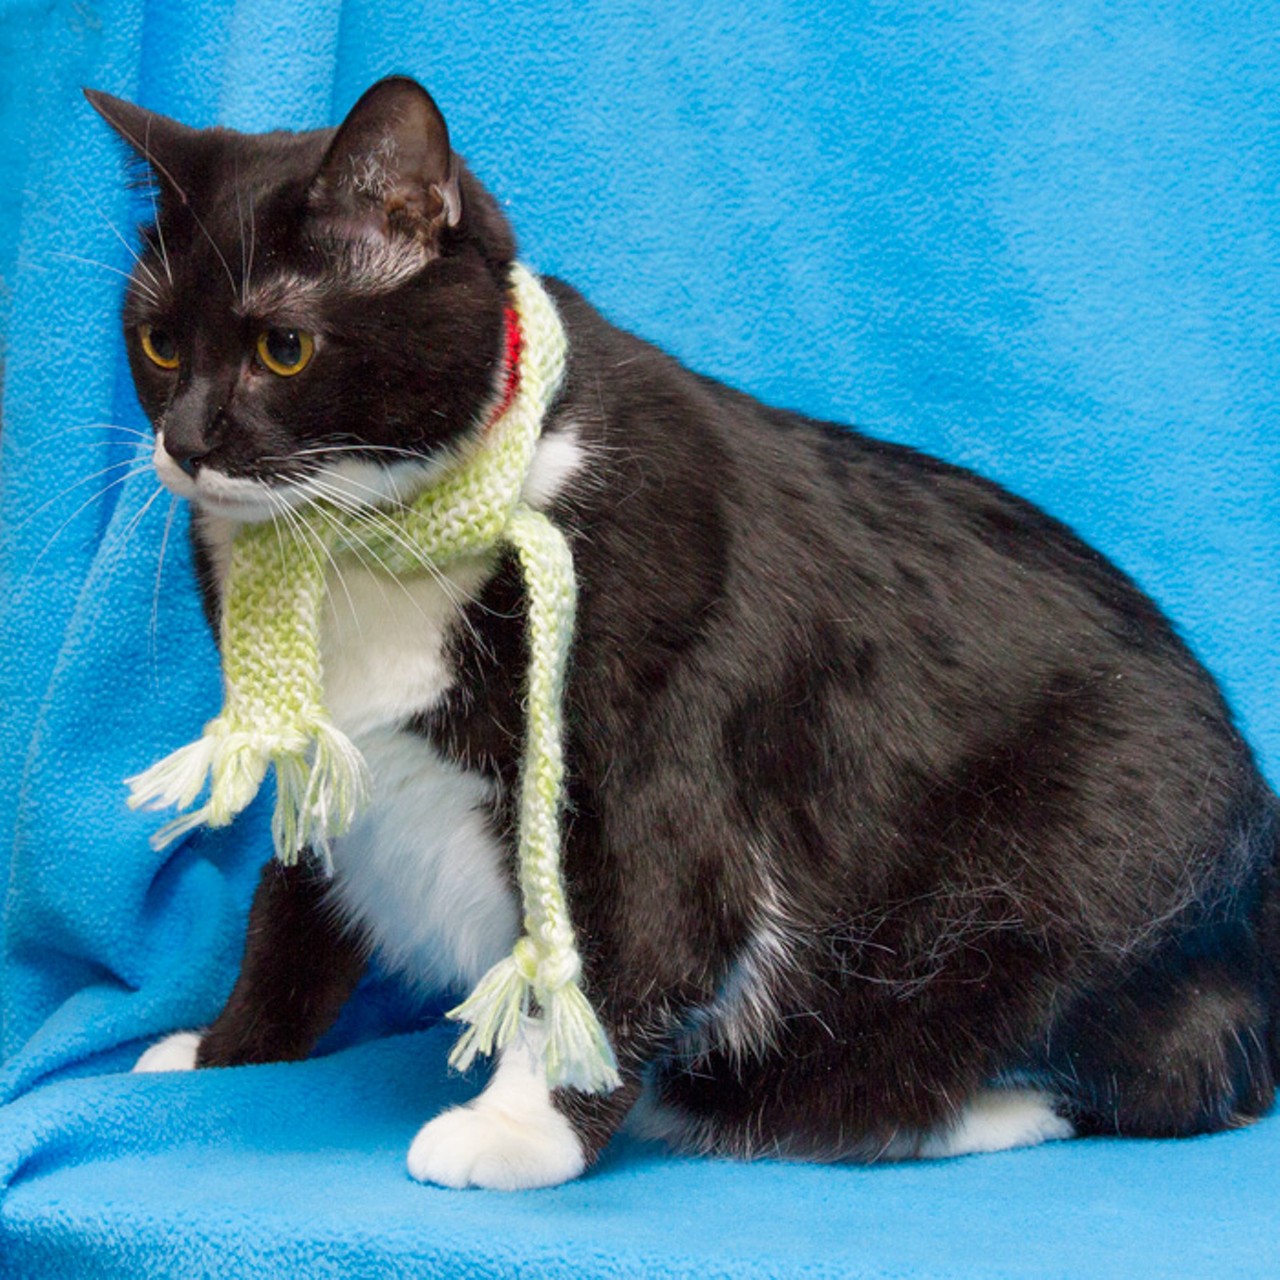 NAME: Panda
GENDER: Female
BREED: Domestic Medium Hair
AGE: 4 years, 7 months
WEIGHT: 14 pounds
SPECIAL CONSIDERATIONS: Prefers a home without children
REASON I CAME TO MHS: Owner surrender
LOCATION: Mackey Center for Animal Care in Detroit
ID NUMBER: 779767